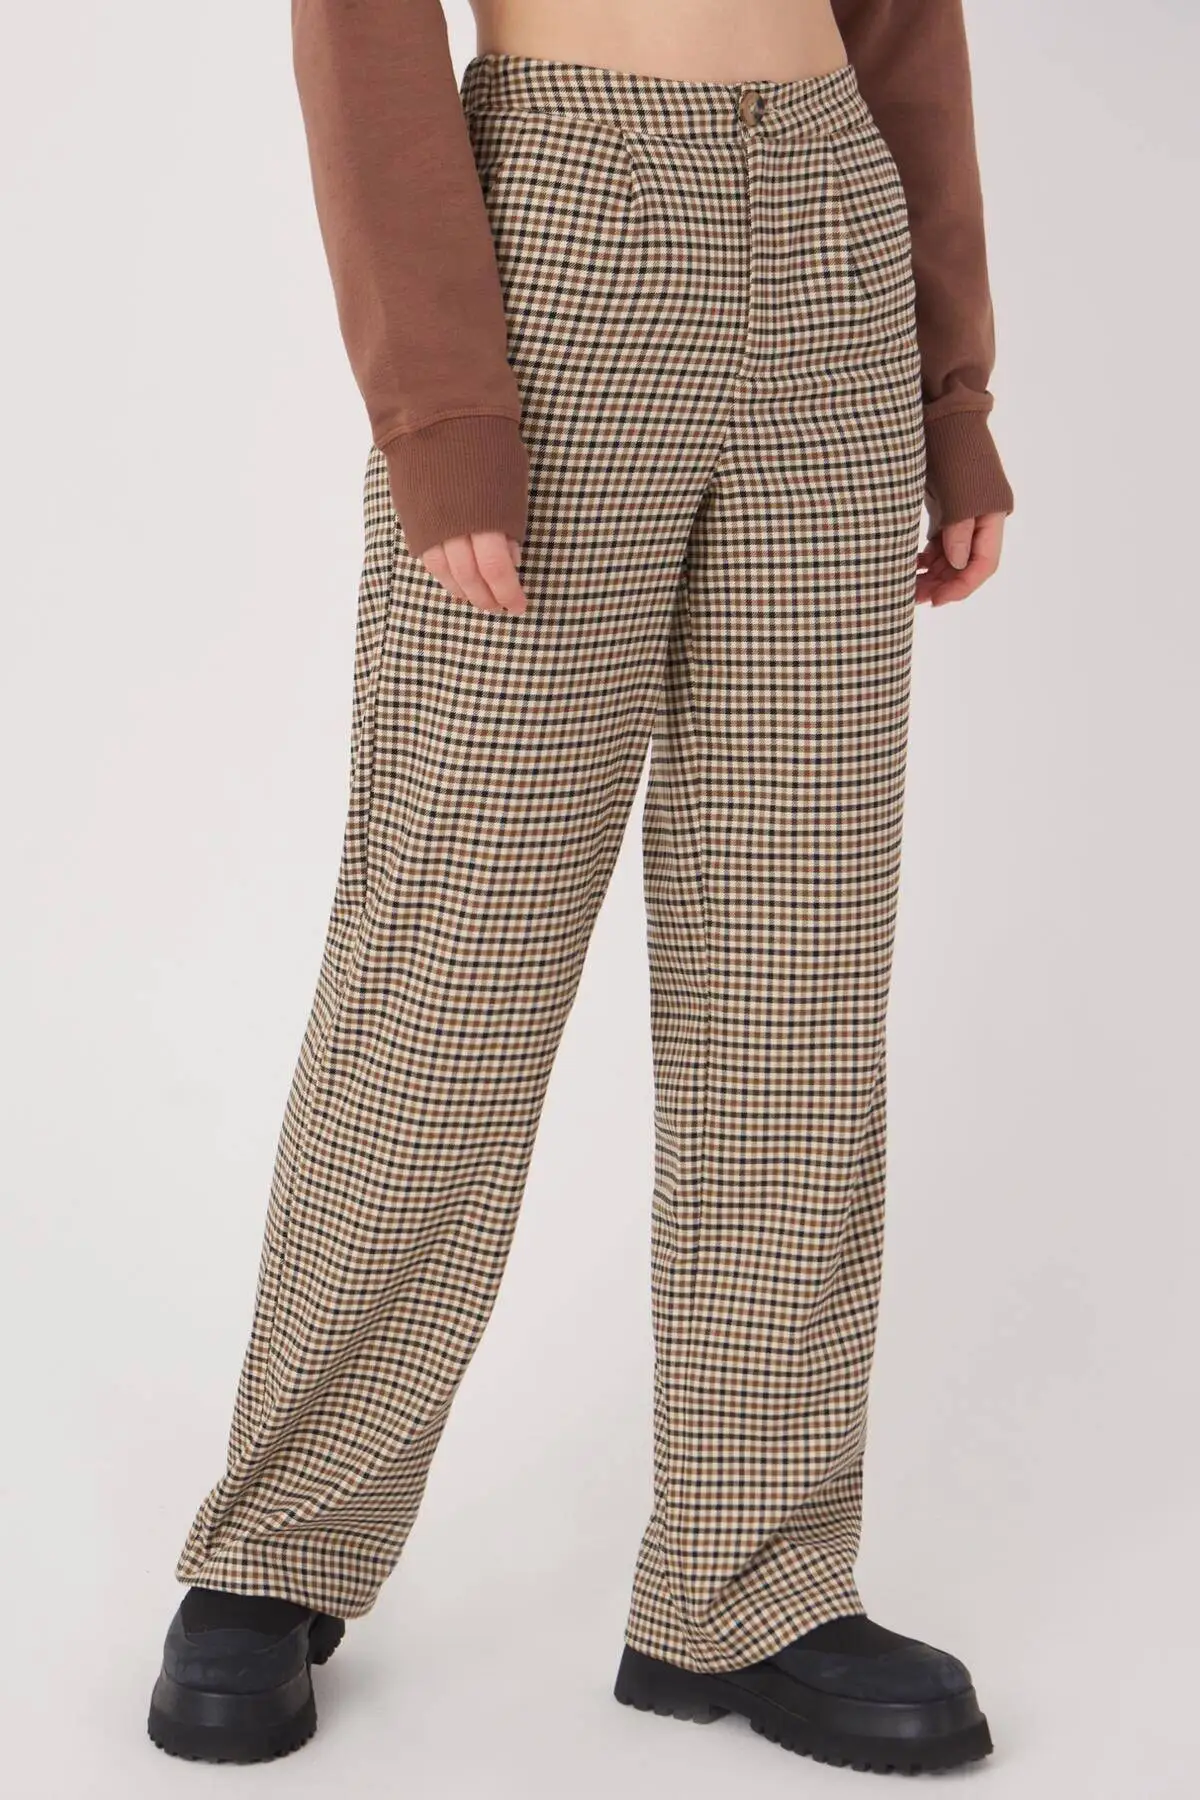 Women's Brown Plaid Pant Stylish casual With Pocket|Pants & Capris 